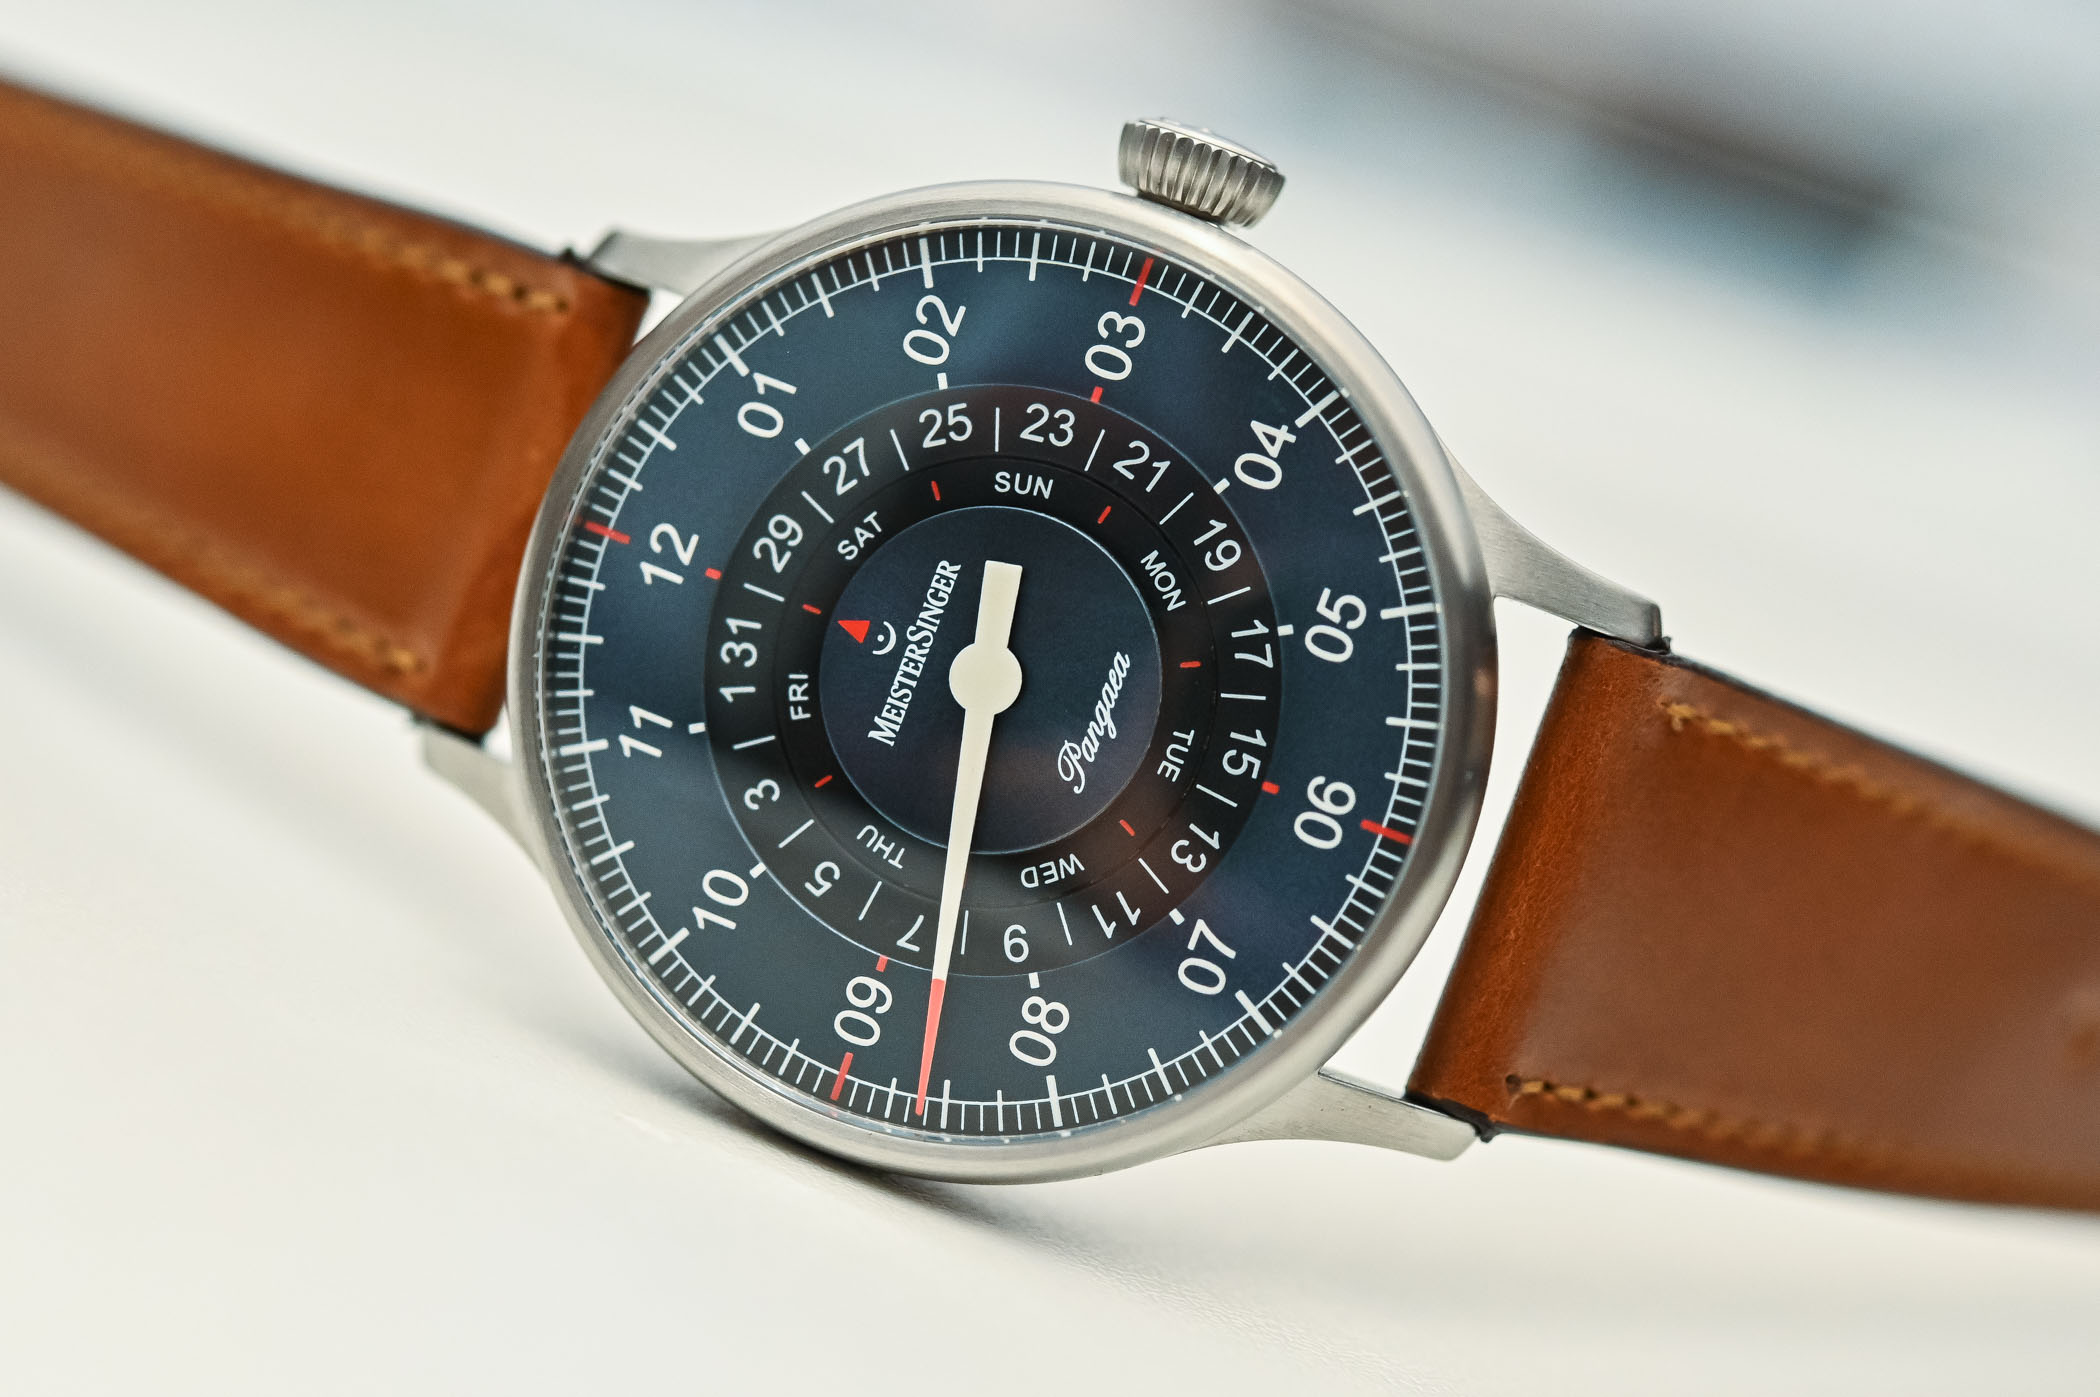 2019 Redesigned MeisterSinger Pangaea Day-Date